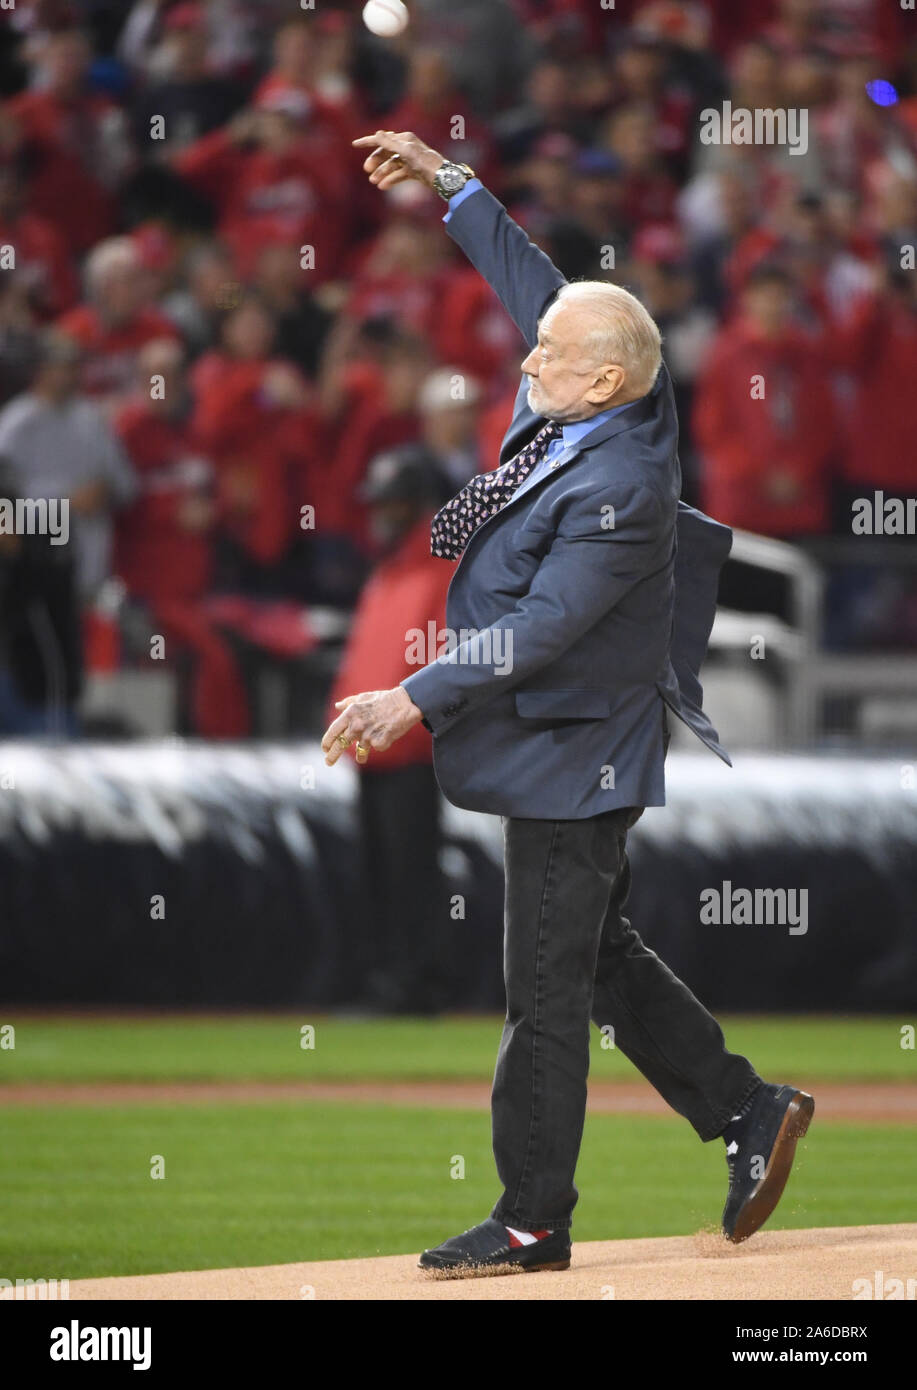 Washington, United States. 25th Oct, 2019. Dr. Col. Buzz Aldrin, astronaut and crew member of the Apollo 11 mission, throws a ceremonial first pitch during ceremonies before the start of Game 3 of the 2019 World Series between the Washington Nationals and the Houston Astros at Nationals Park in Washington, DC on Friday, October 25, 2019. Photo by Kevin Dietsch/UPI Credit: UPI/Alamy Live News Stock Photo